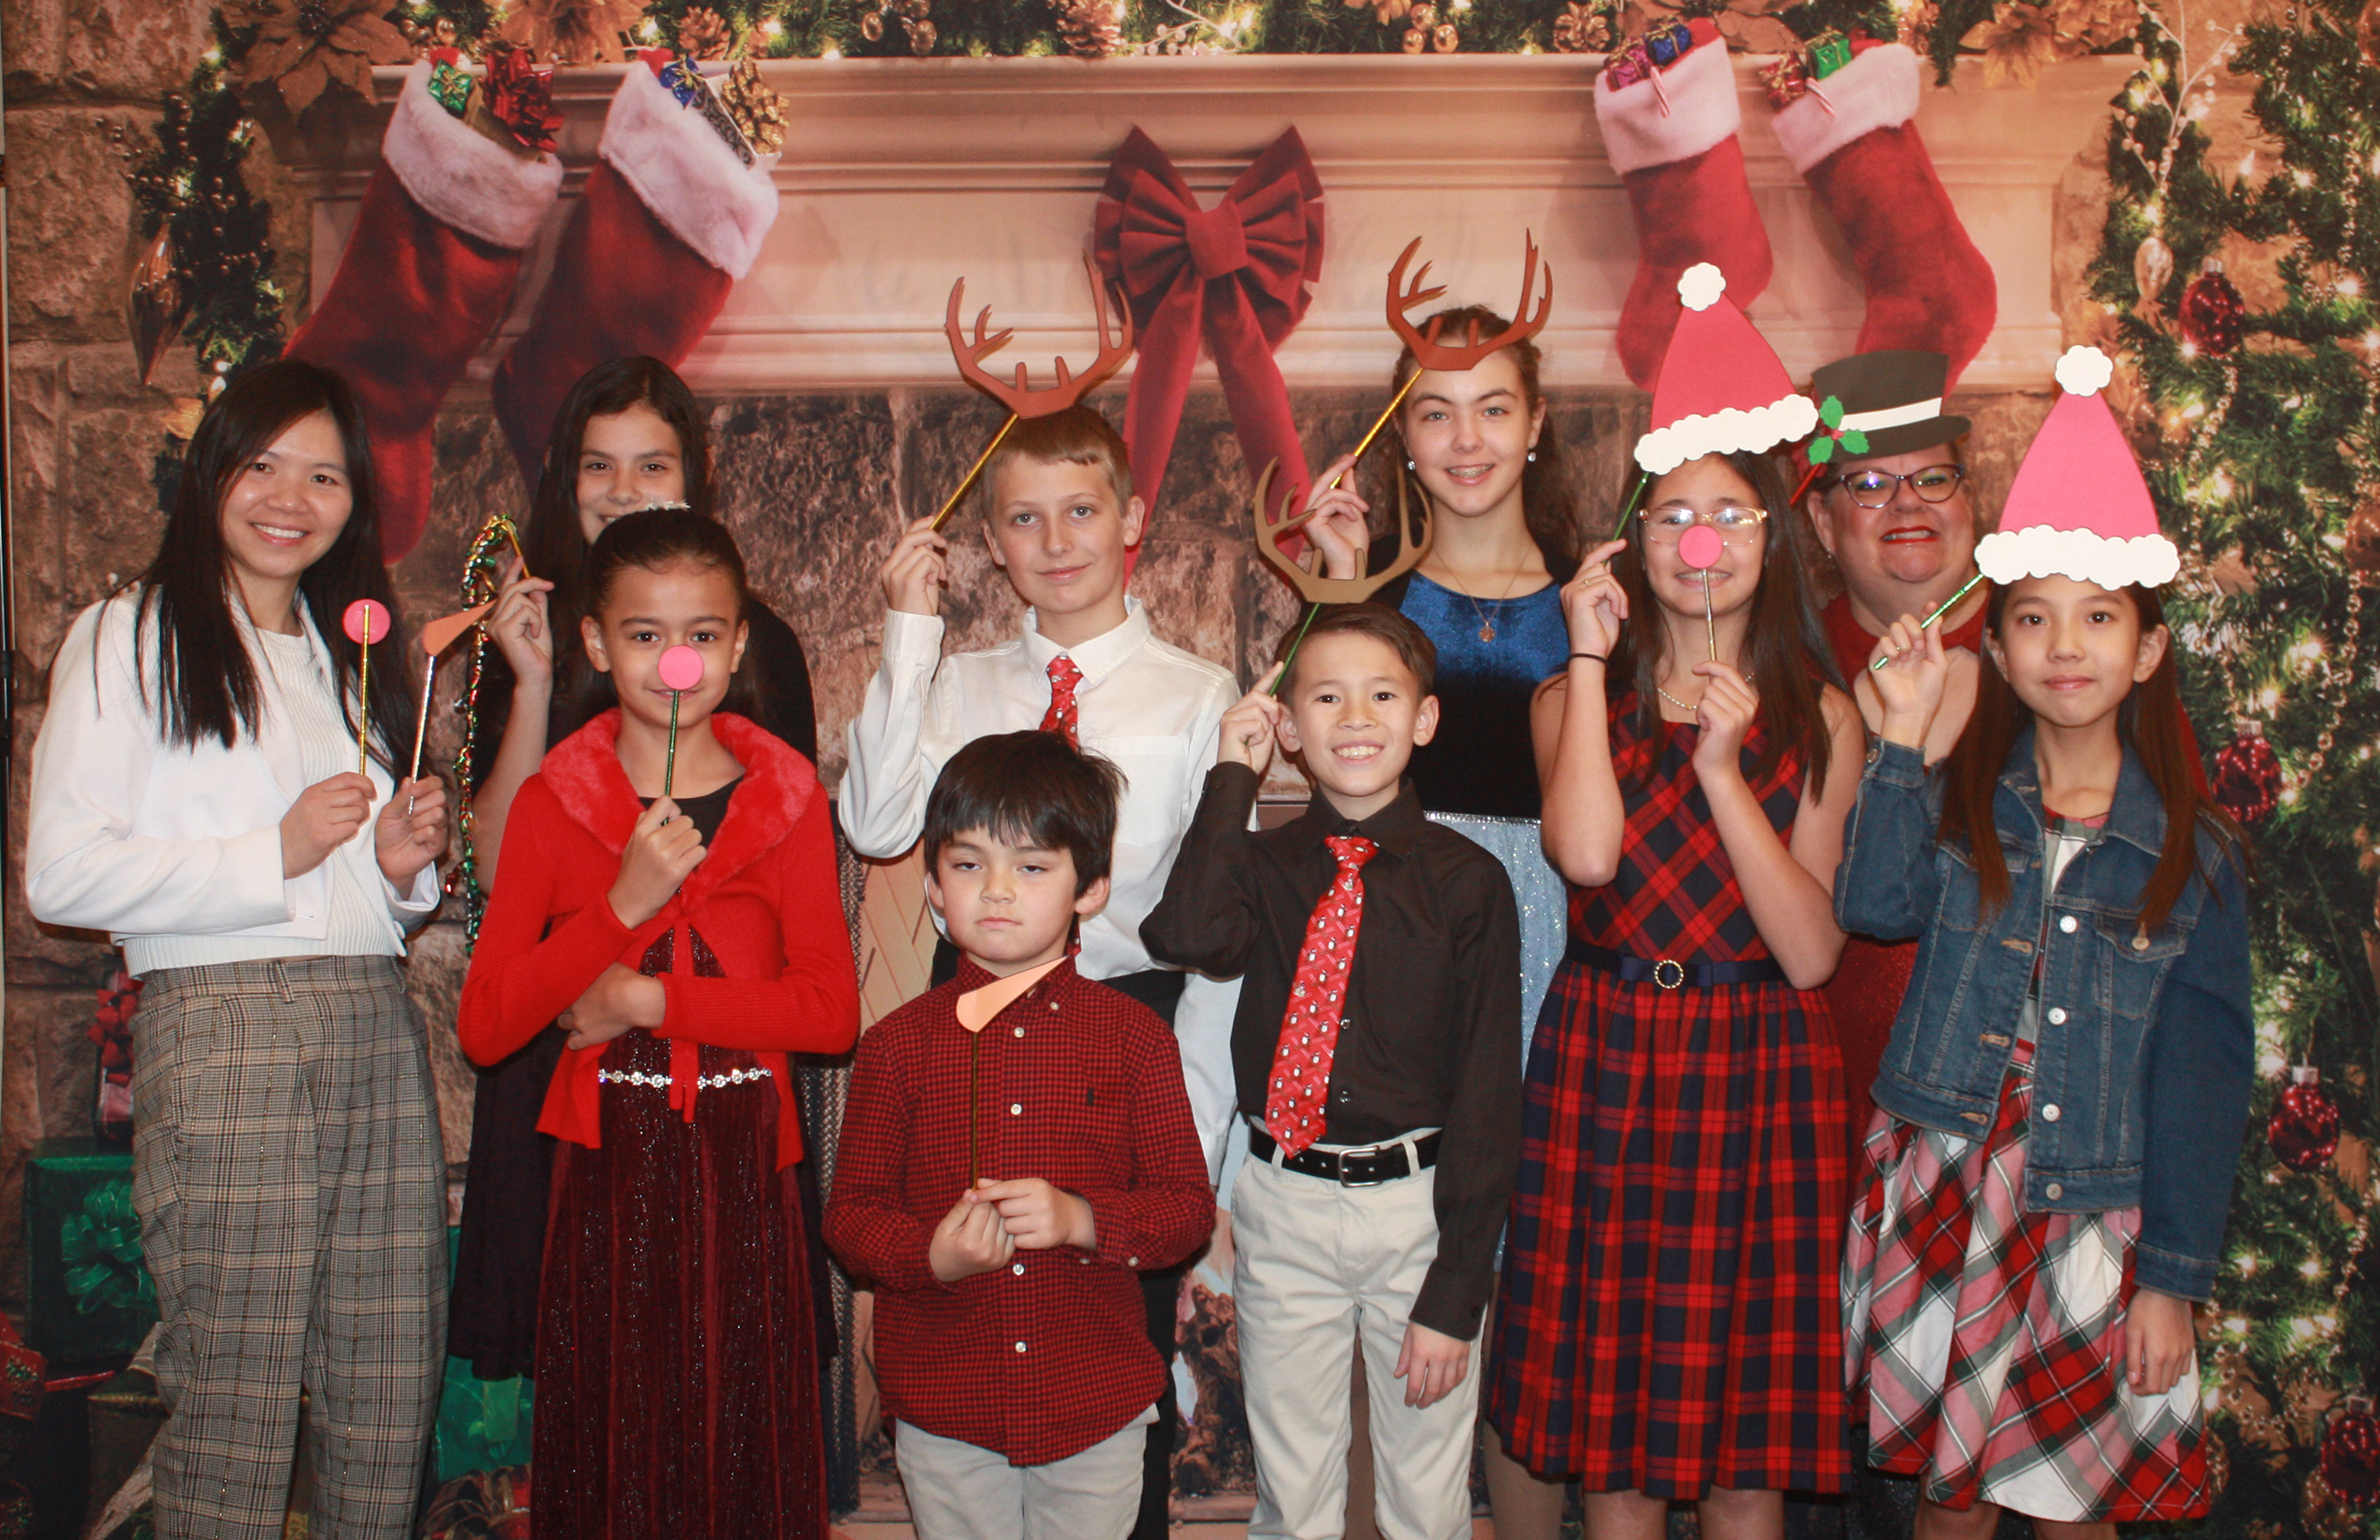 Students posing after a Christmas recital with Christmas decor.